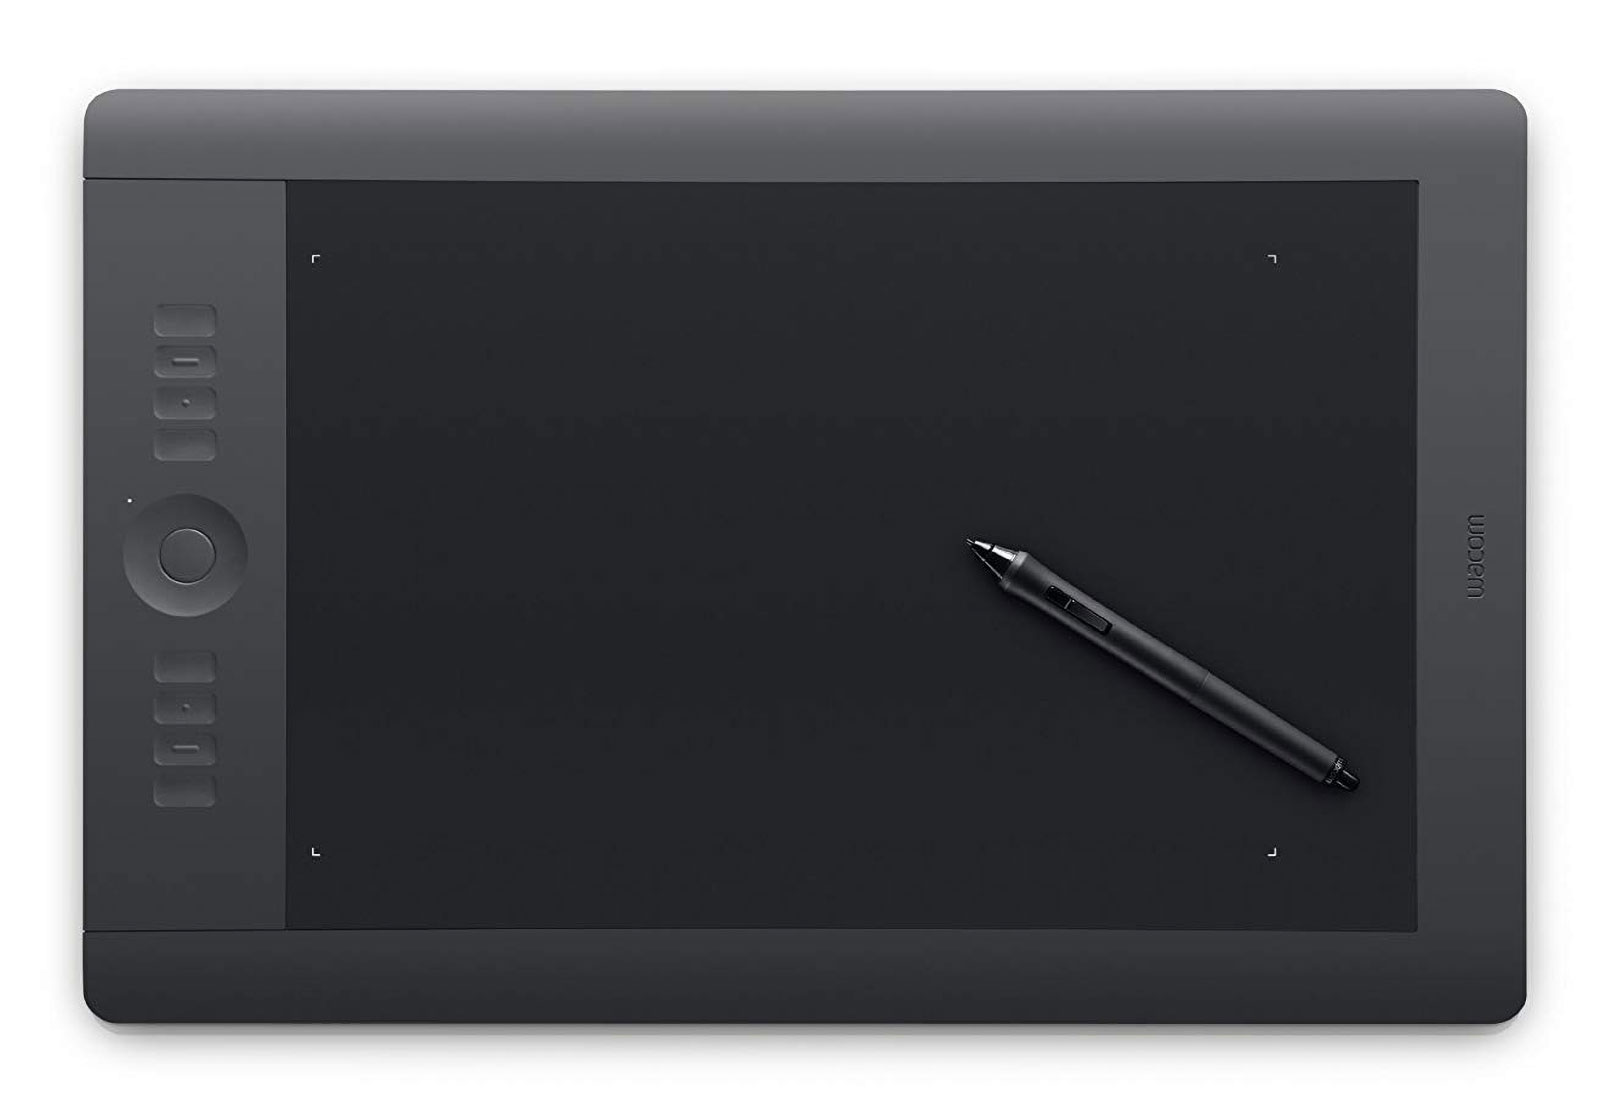 PC/タブレット タブレット A practical Wacom One Creative Pen Display review - Photofocus